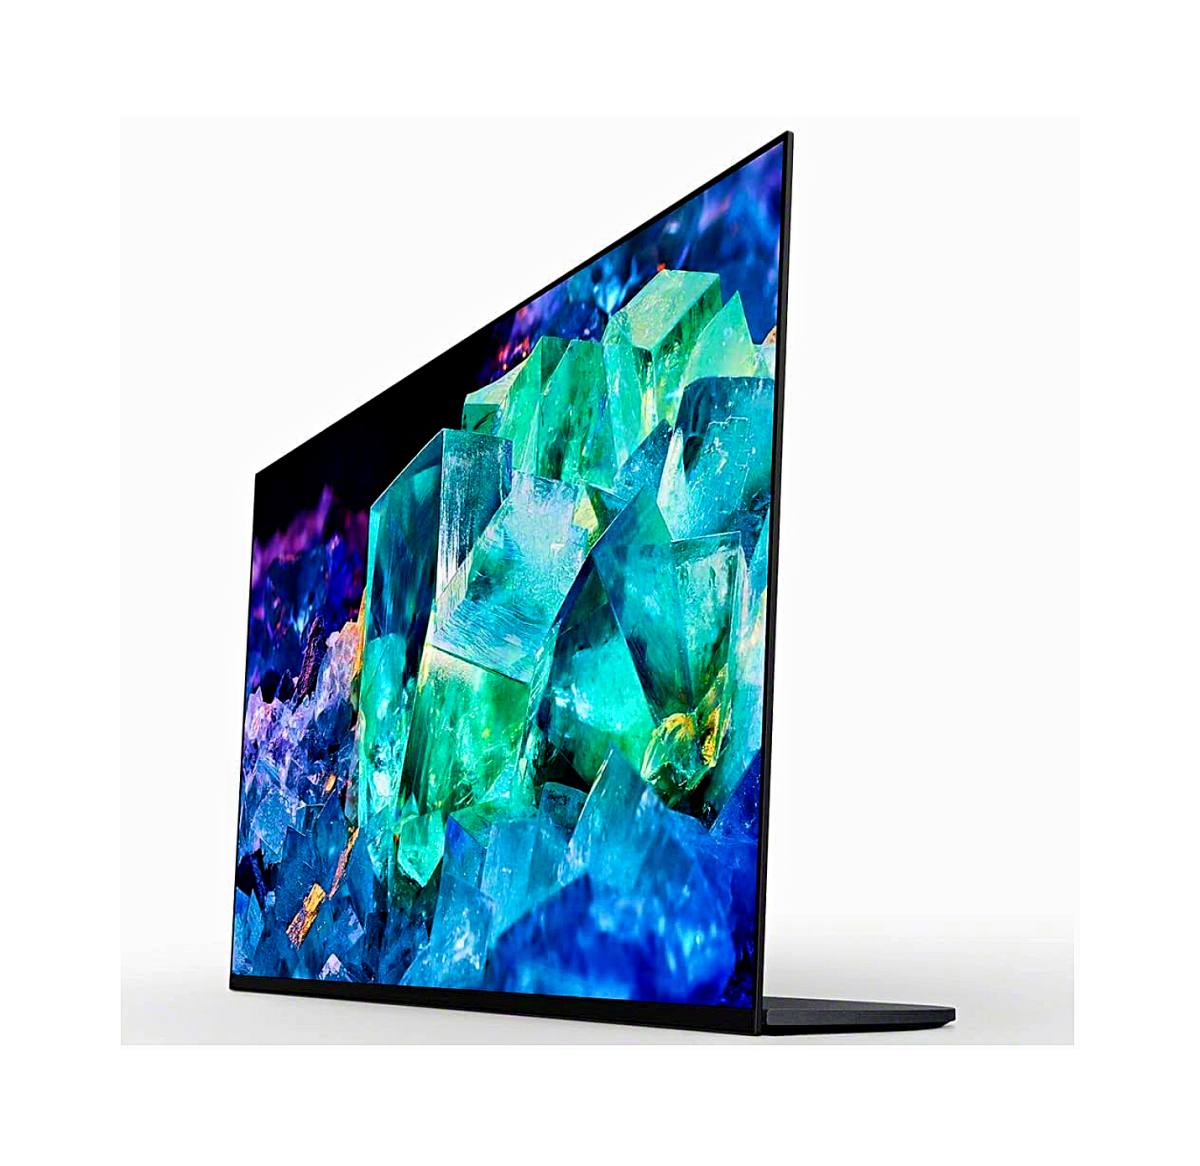 A side view of the ultra-slim Sony Bravia XR A95K OLED TV